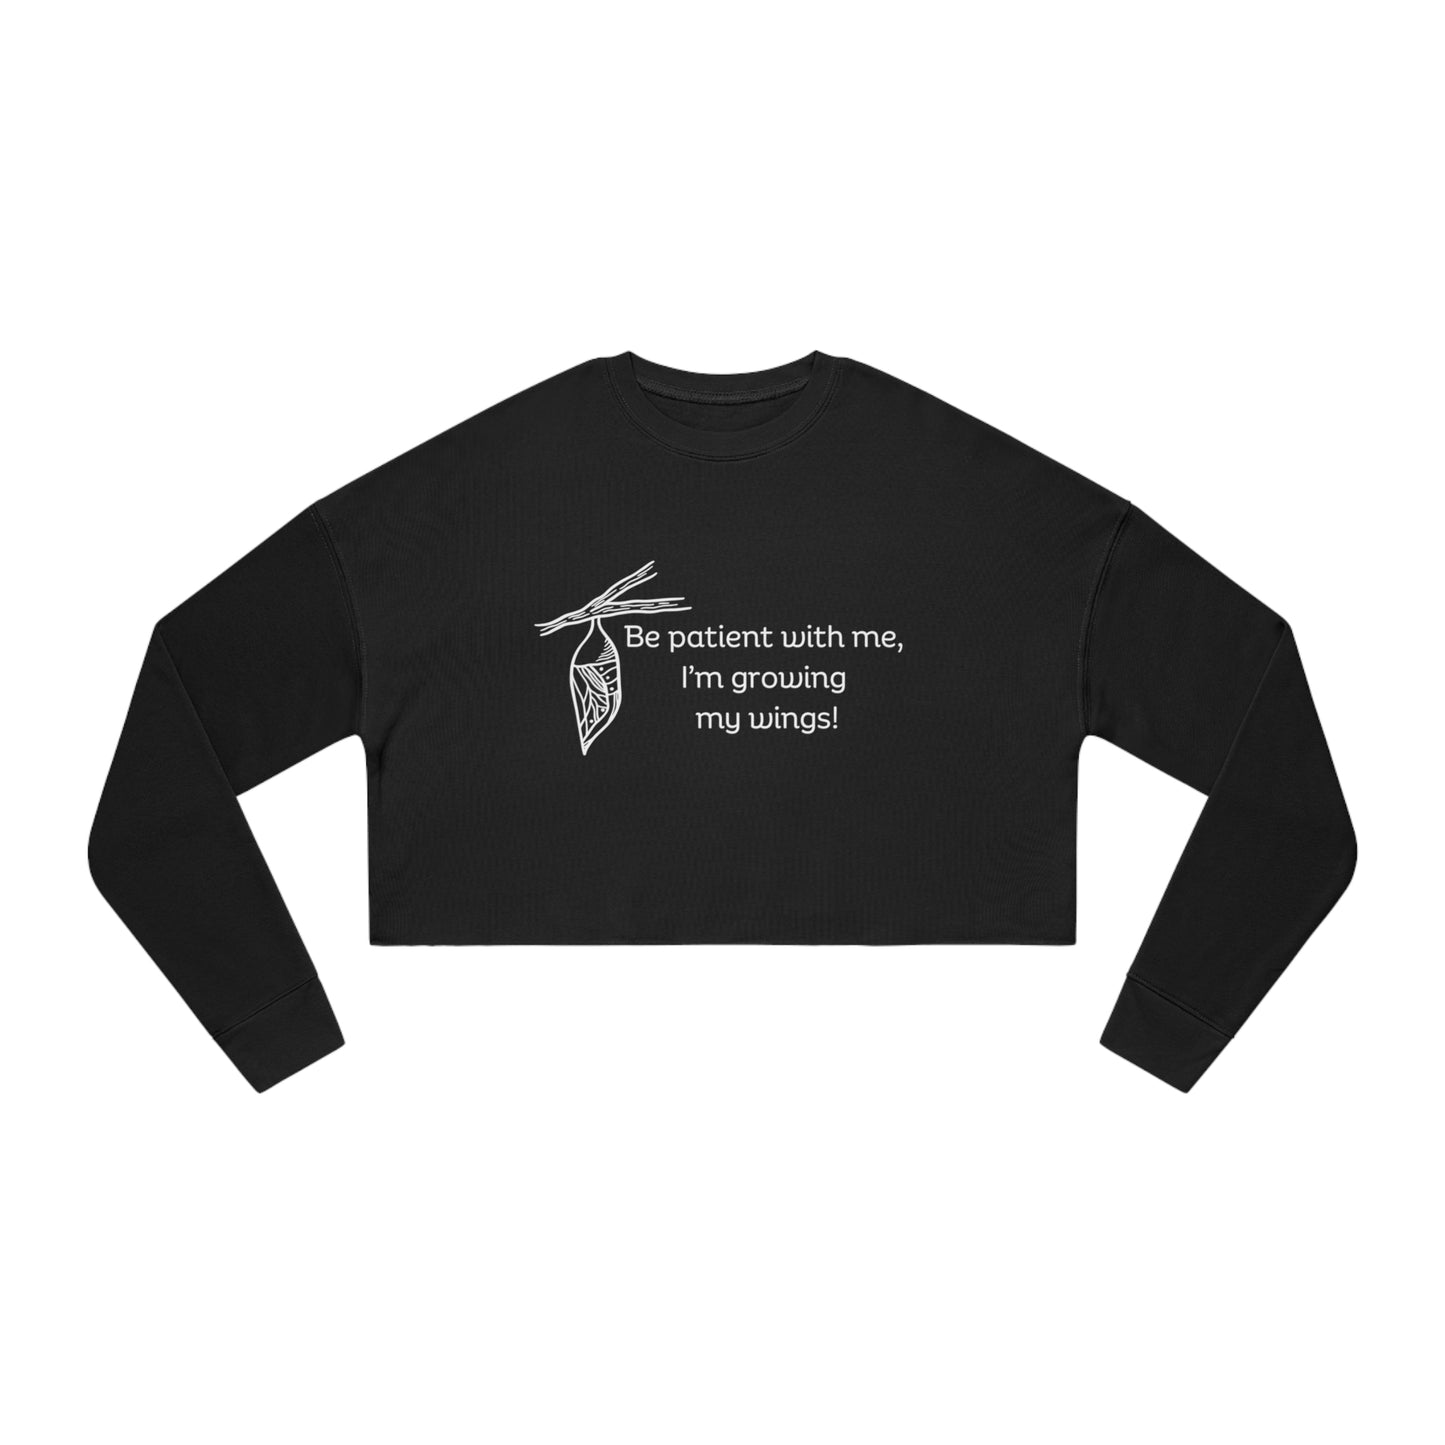 "Be patient with me, I'm growing my wings" Women's Cropped Sweatshirt